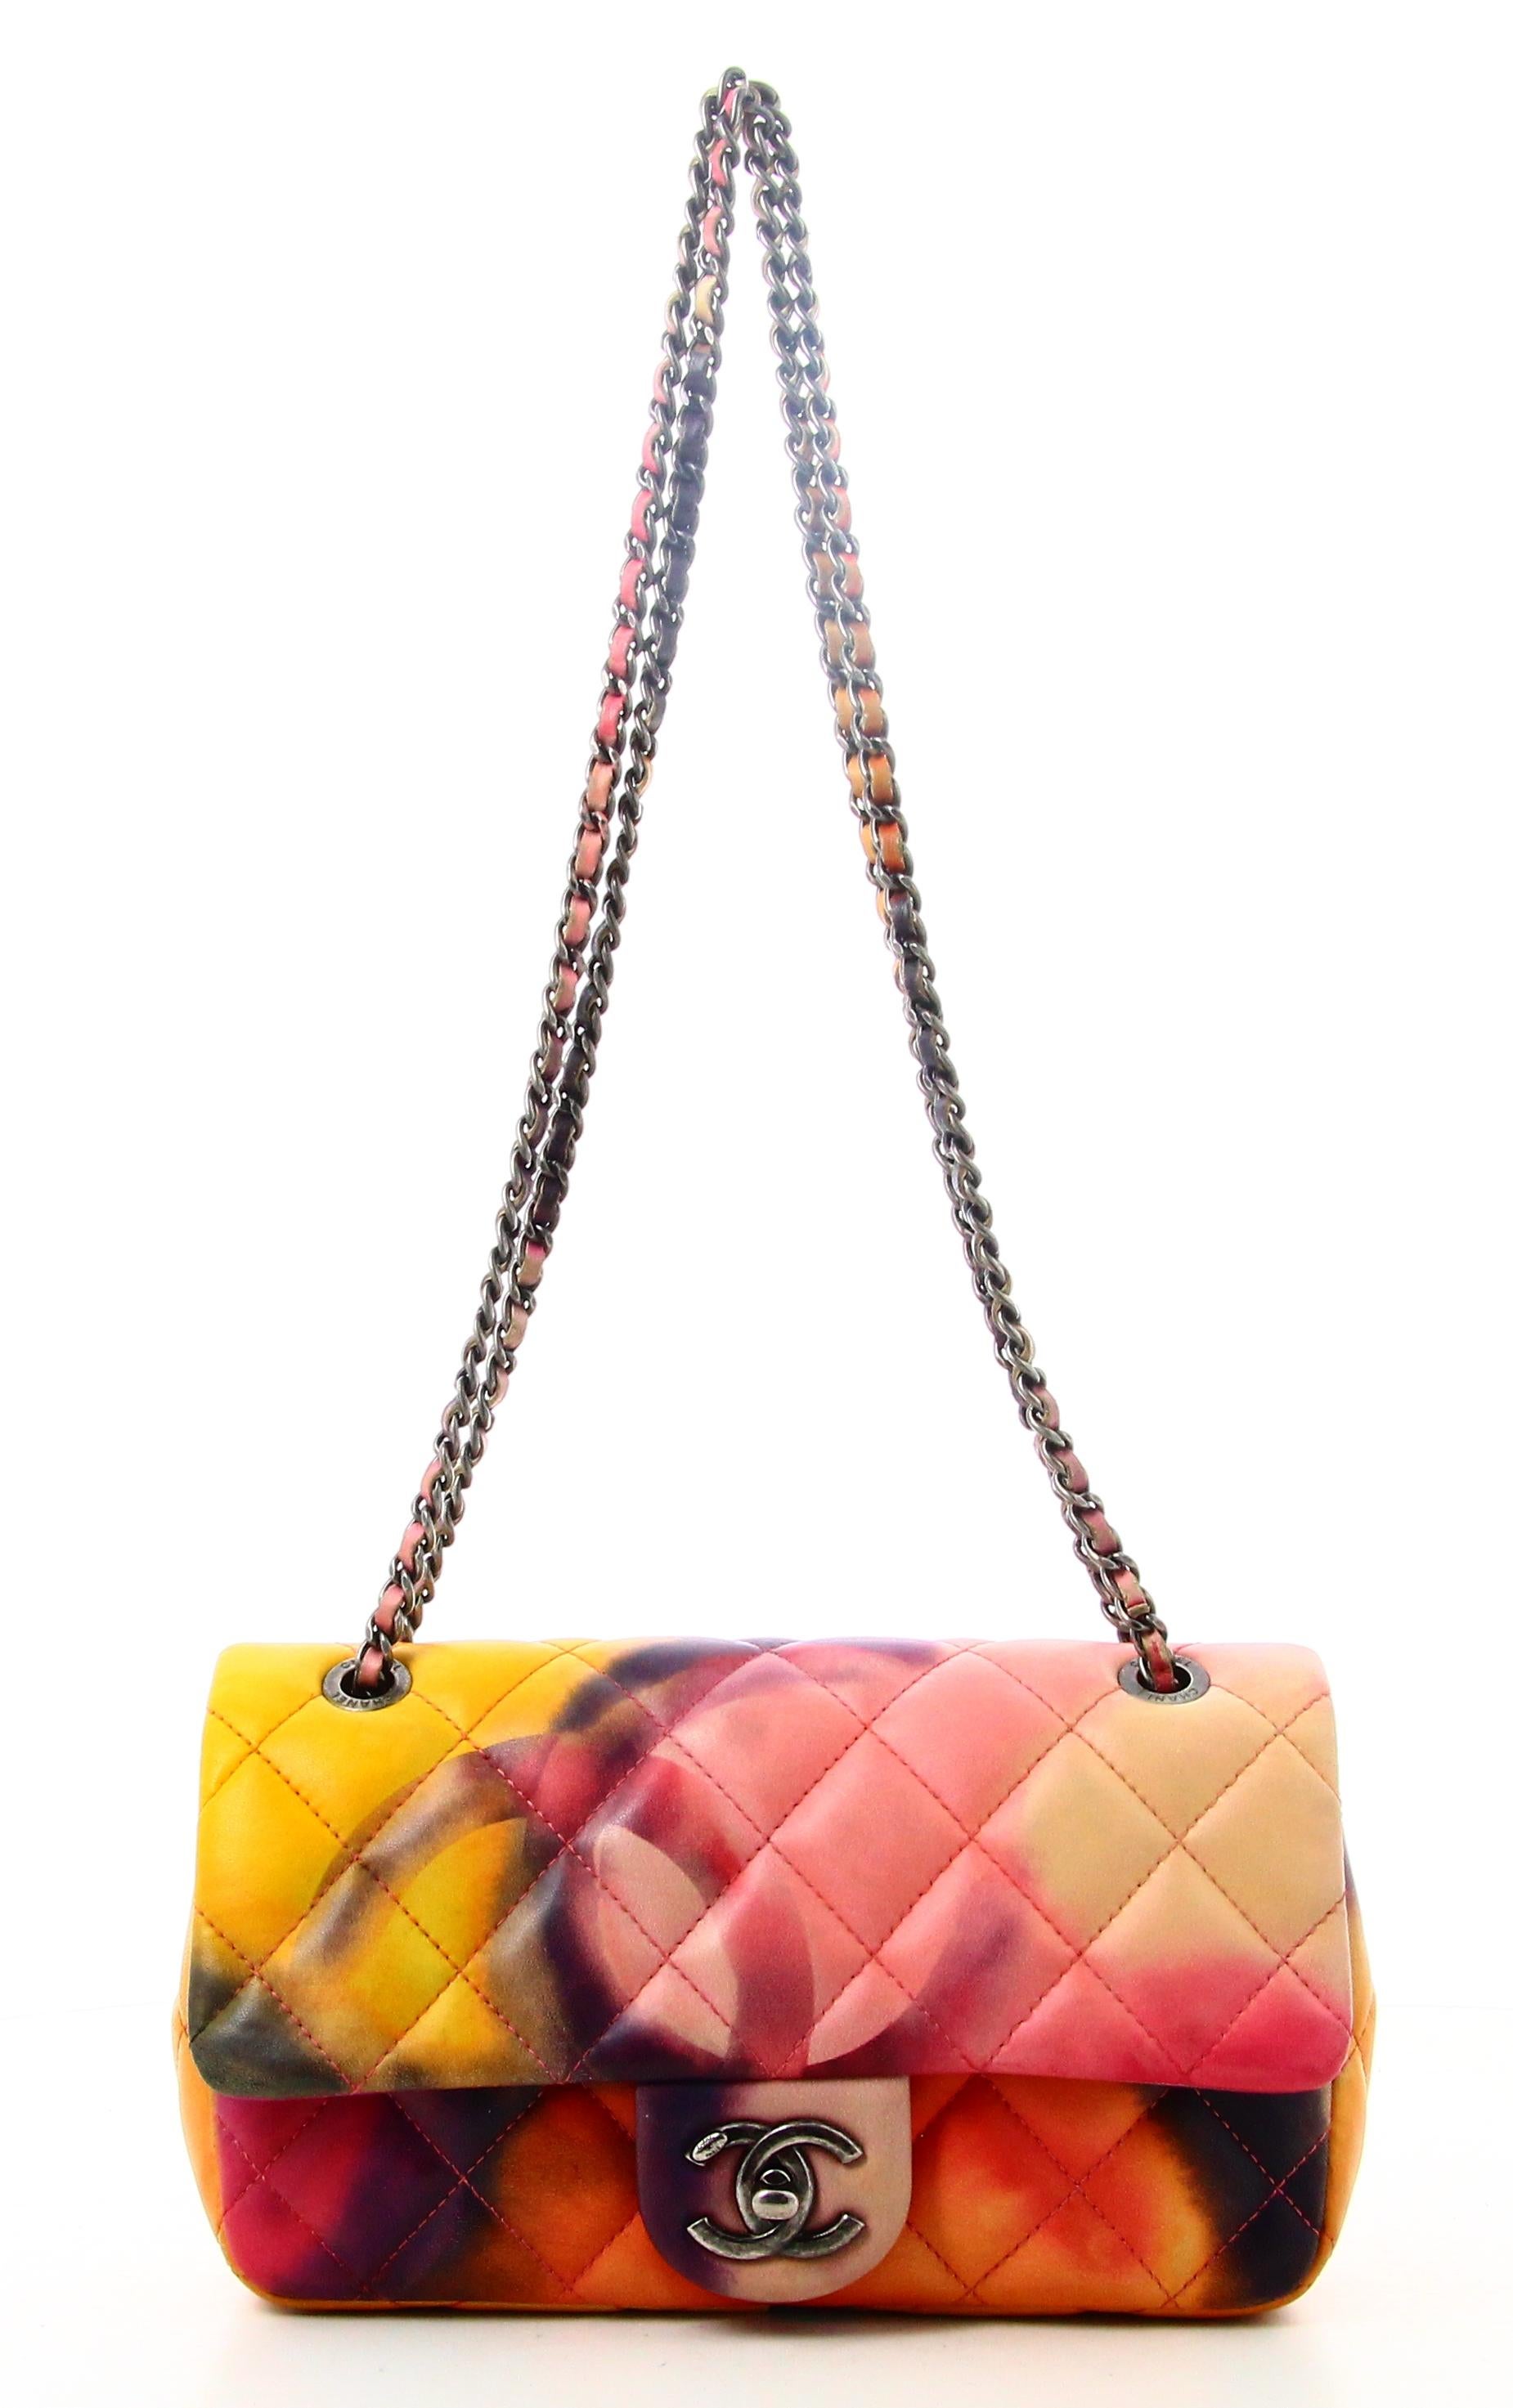 2015 Chanel Timeless Handbag Grafitti Multicolor Quilted Leather 

- Good condition. Shows slight signs of wear over time. 
- Chanel Handbag 
- Grafitti. Quilted leather
- Double chain
- Clasp: silver double C 
- Interior: black fabric plus small